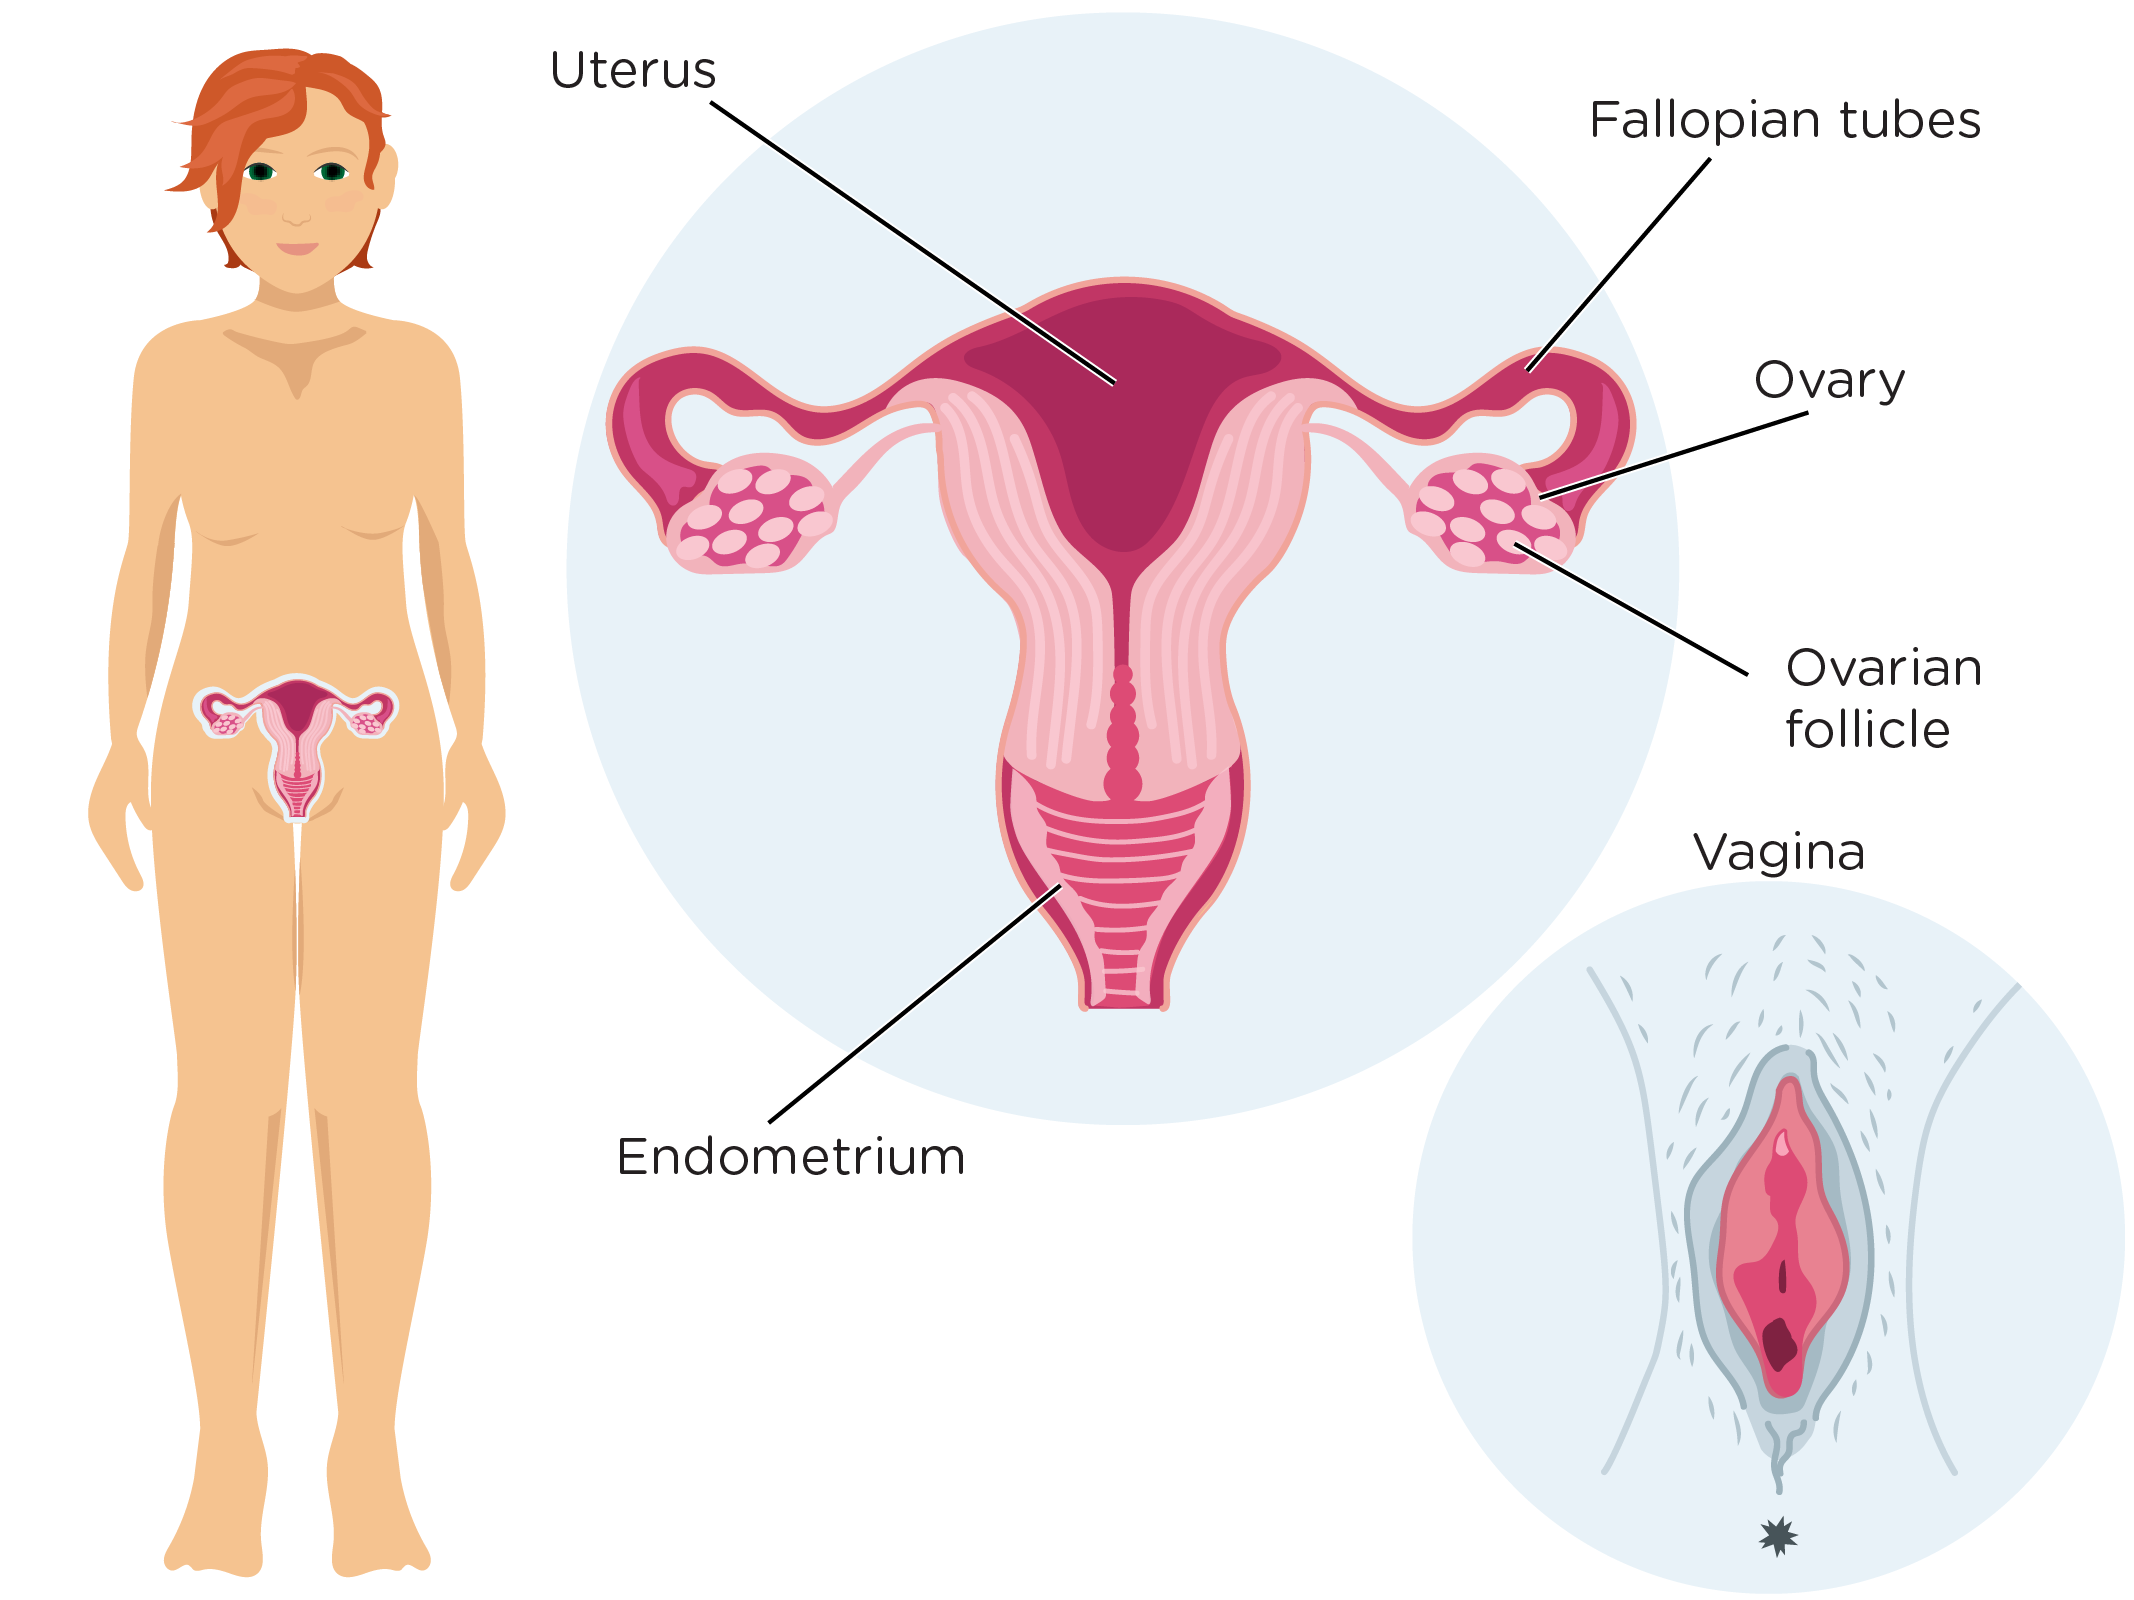 A young person with an with an uterus overlay on the pelvis area. Also an illustration of a uterus with it's different parts, fallopian tubes, ovary, ovarian follicle, endometrium. There is also an illustration of a vagina